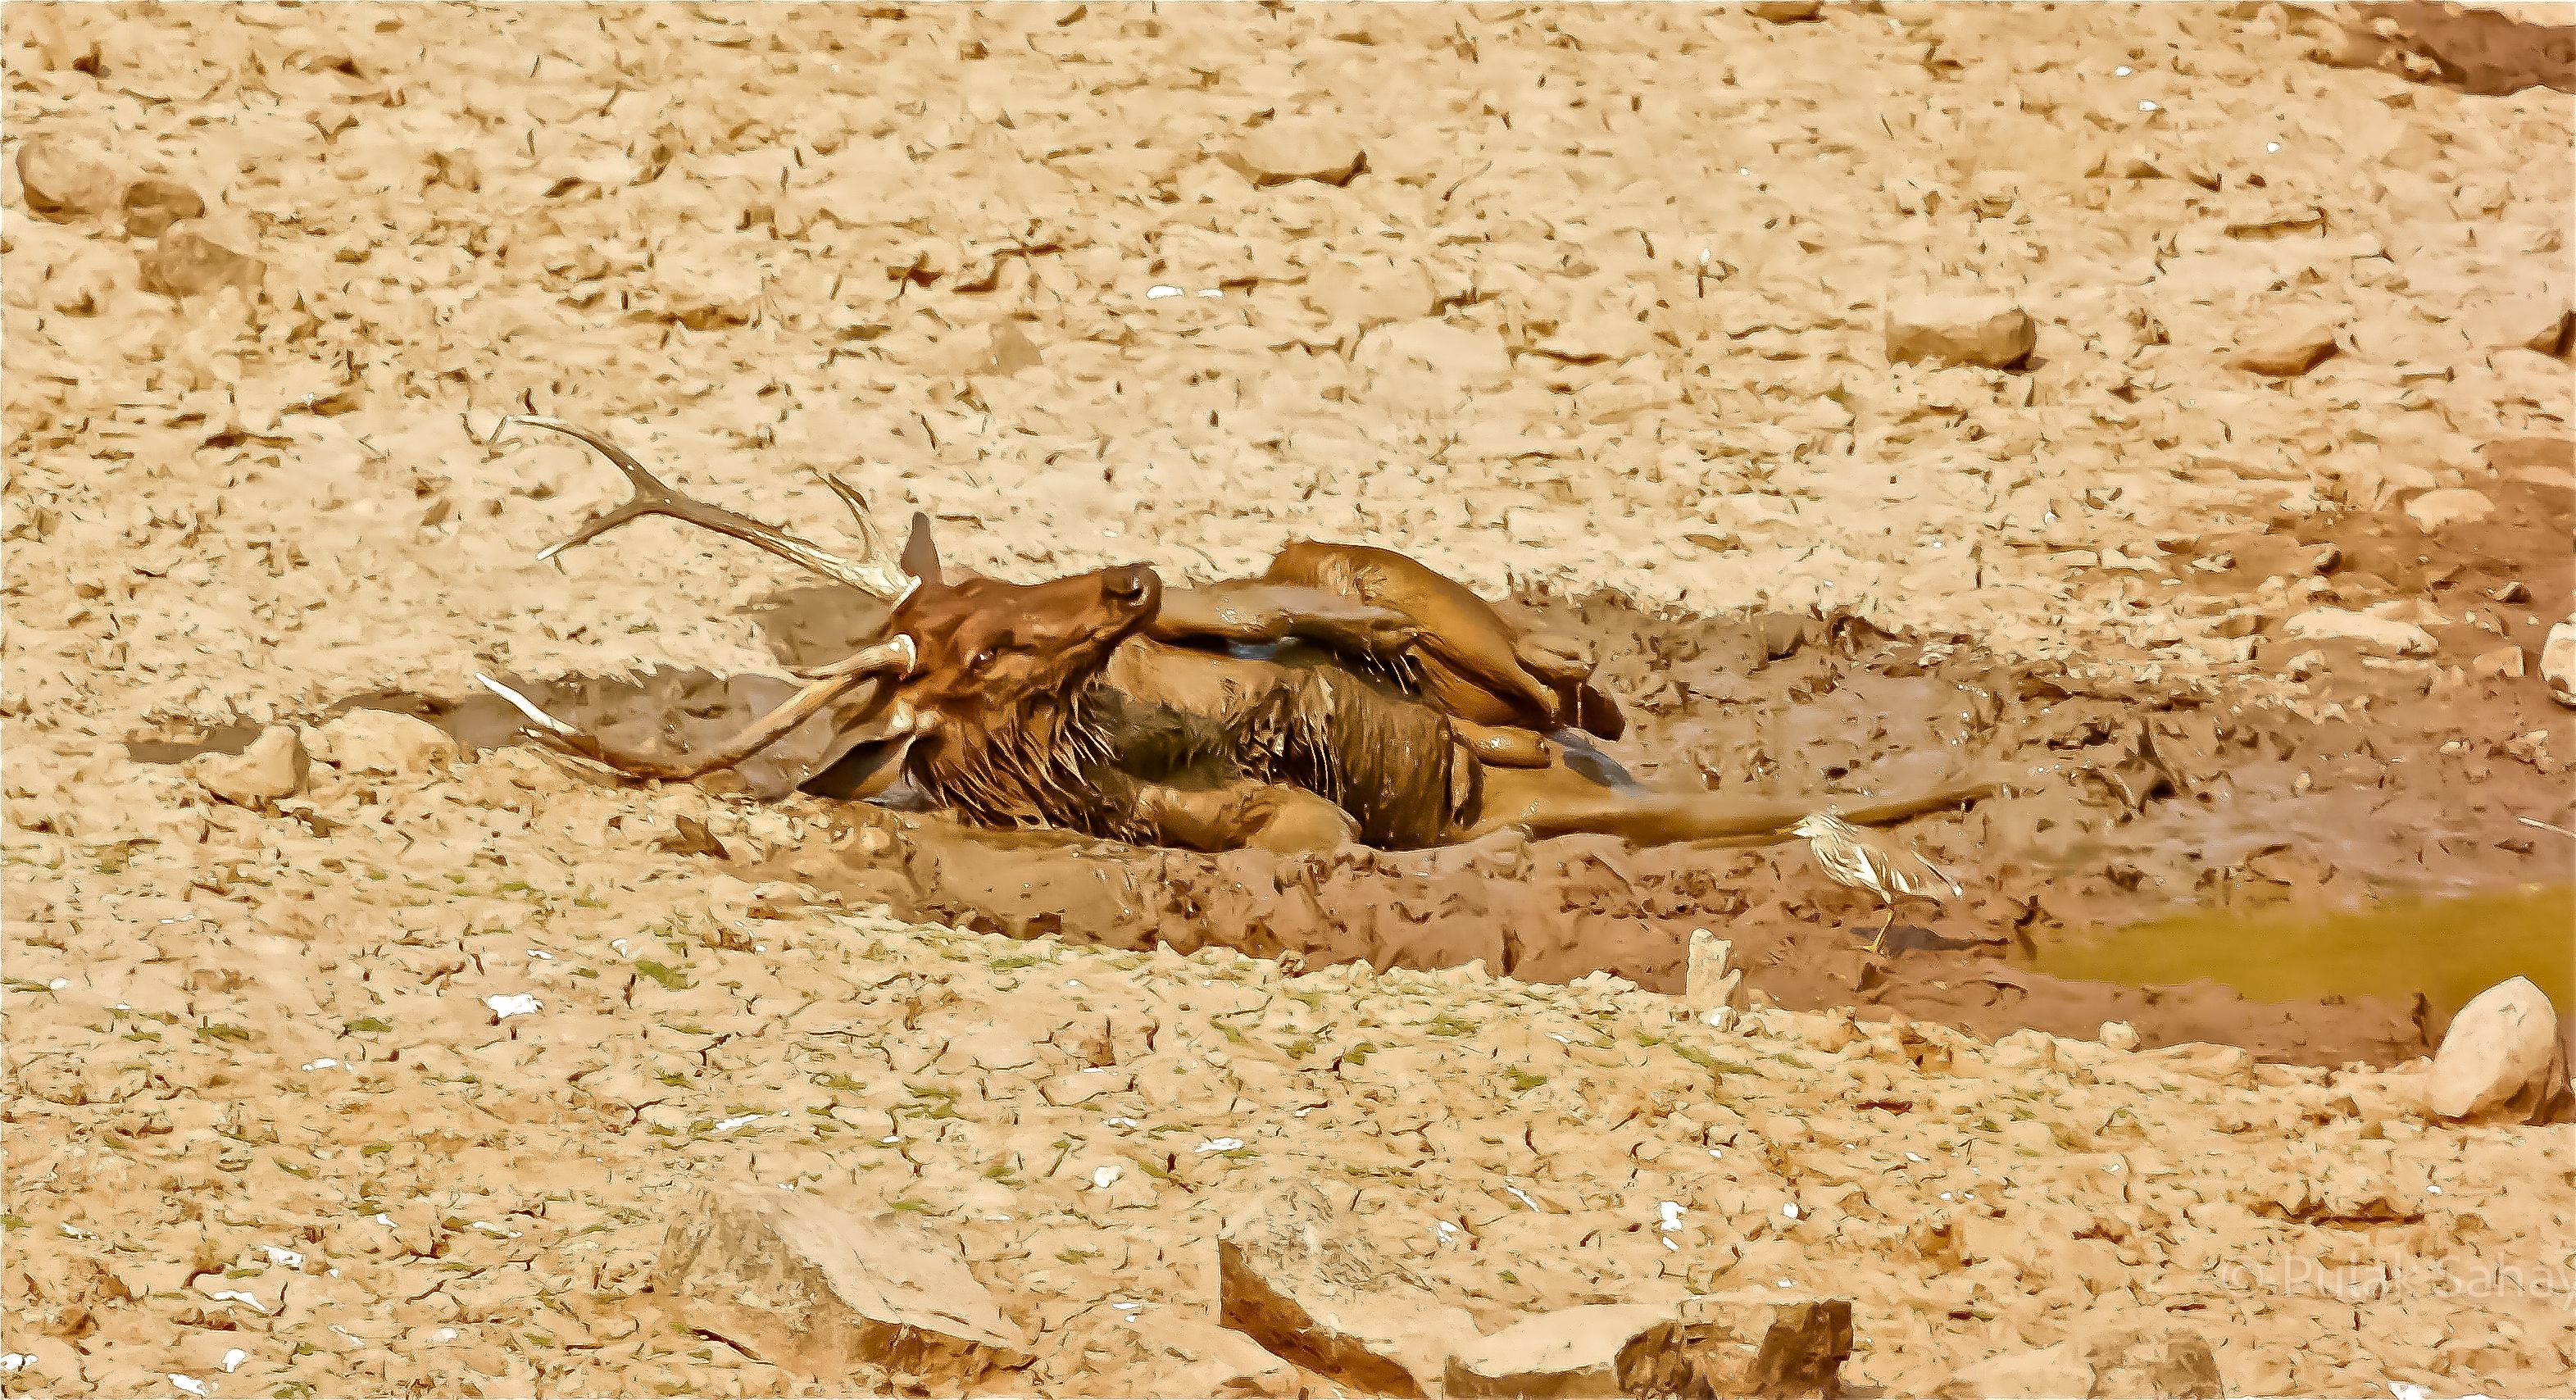 Deer cooling in mud with a bird watching